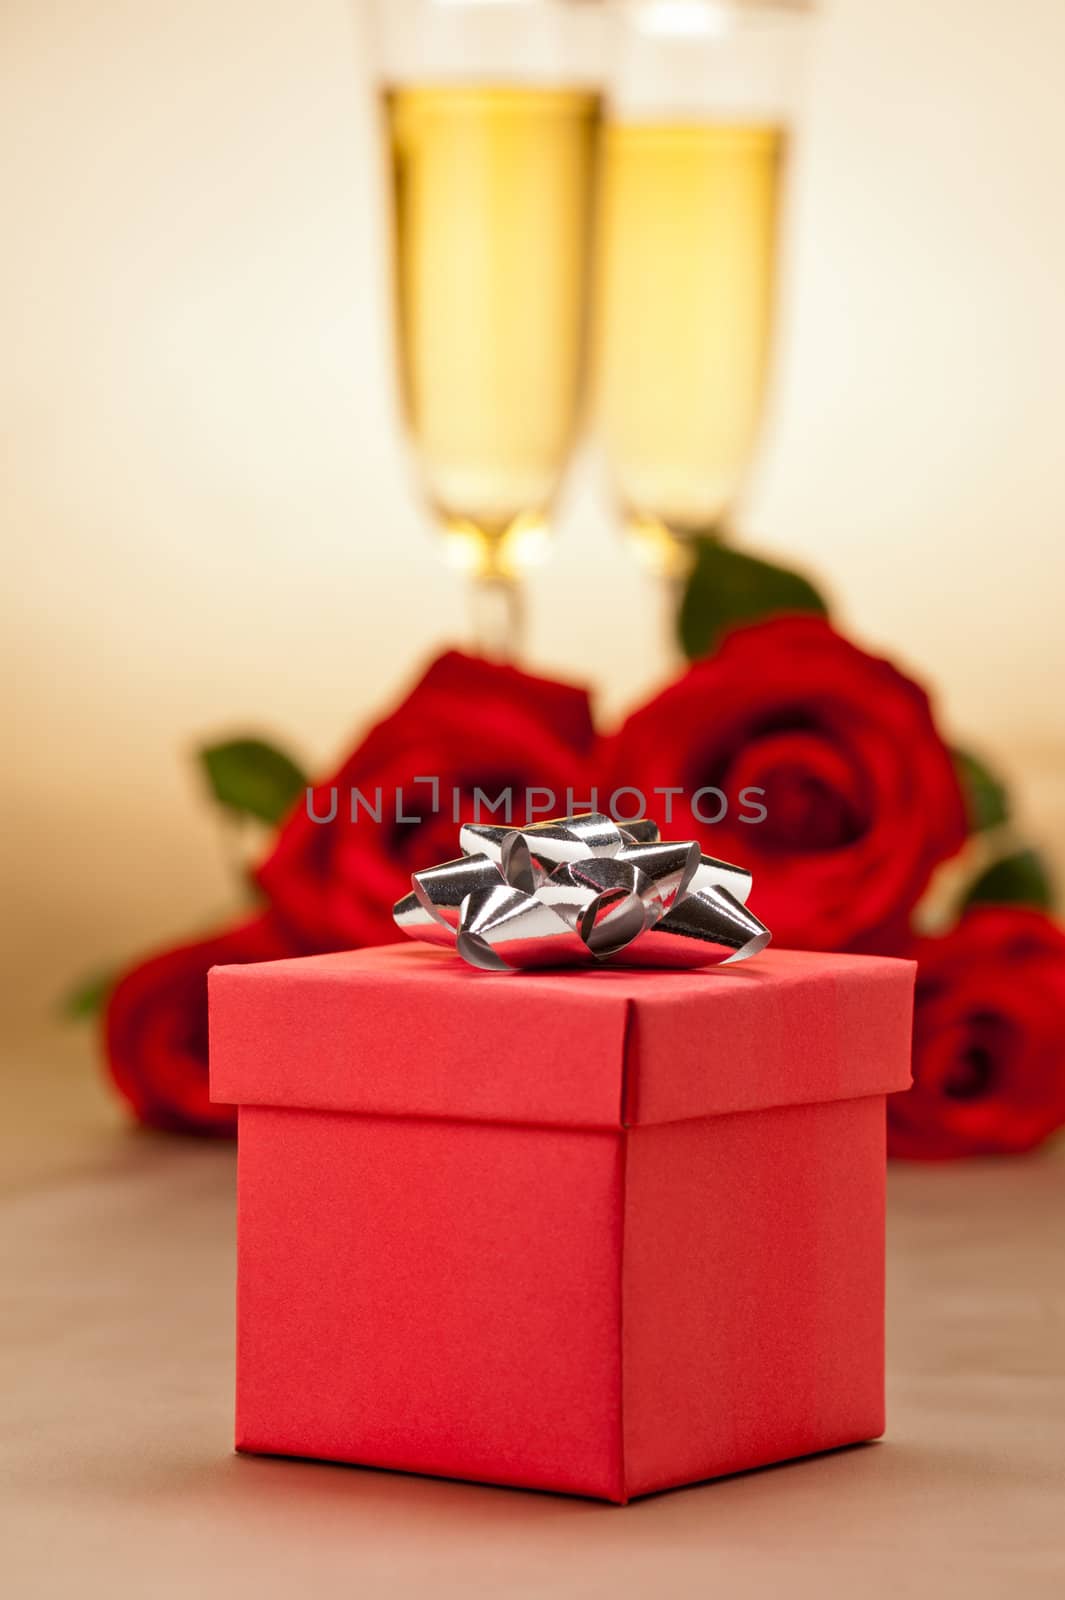 Champagne glasses, present and roses in front of beige background